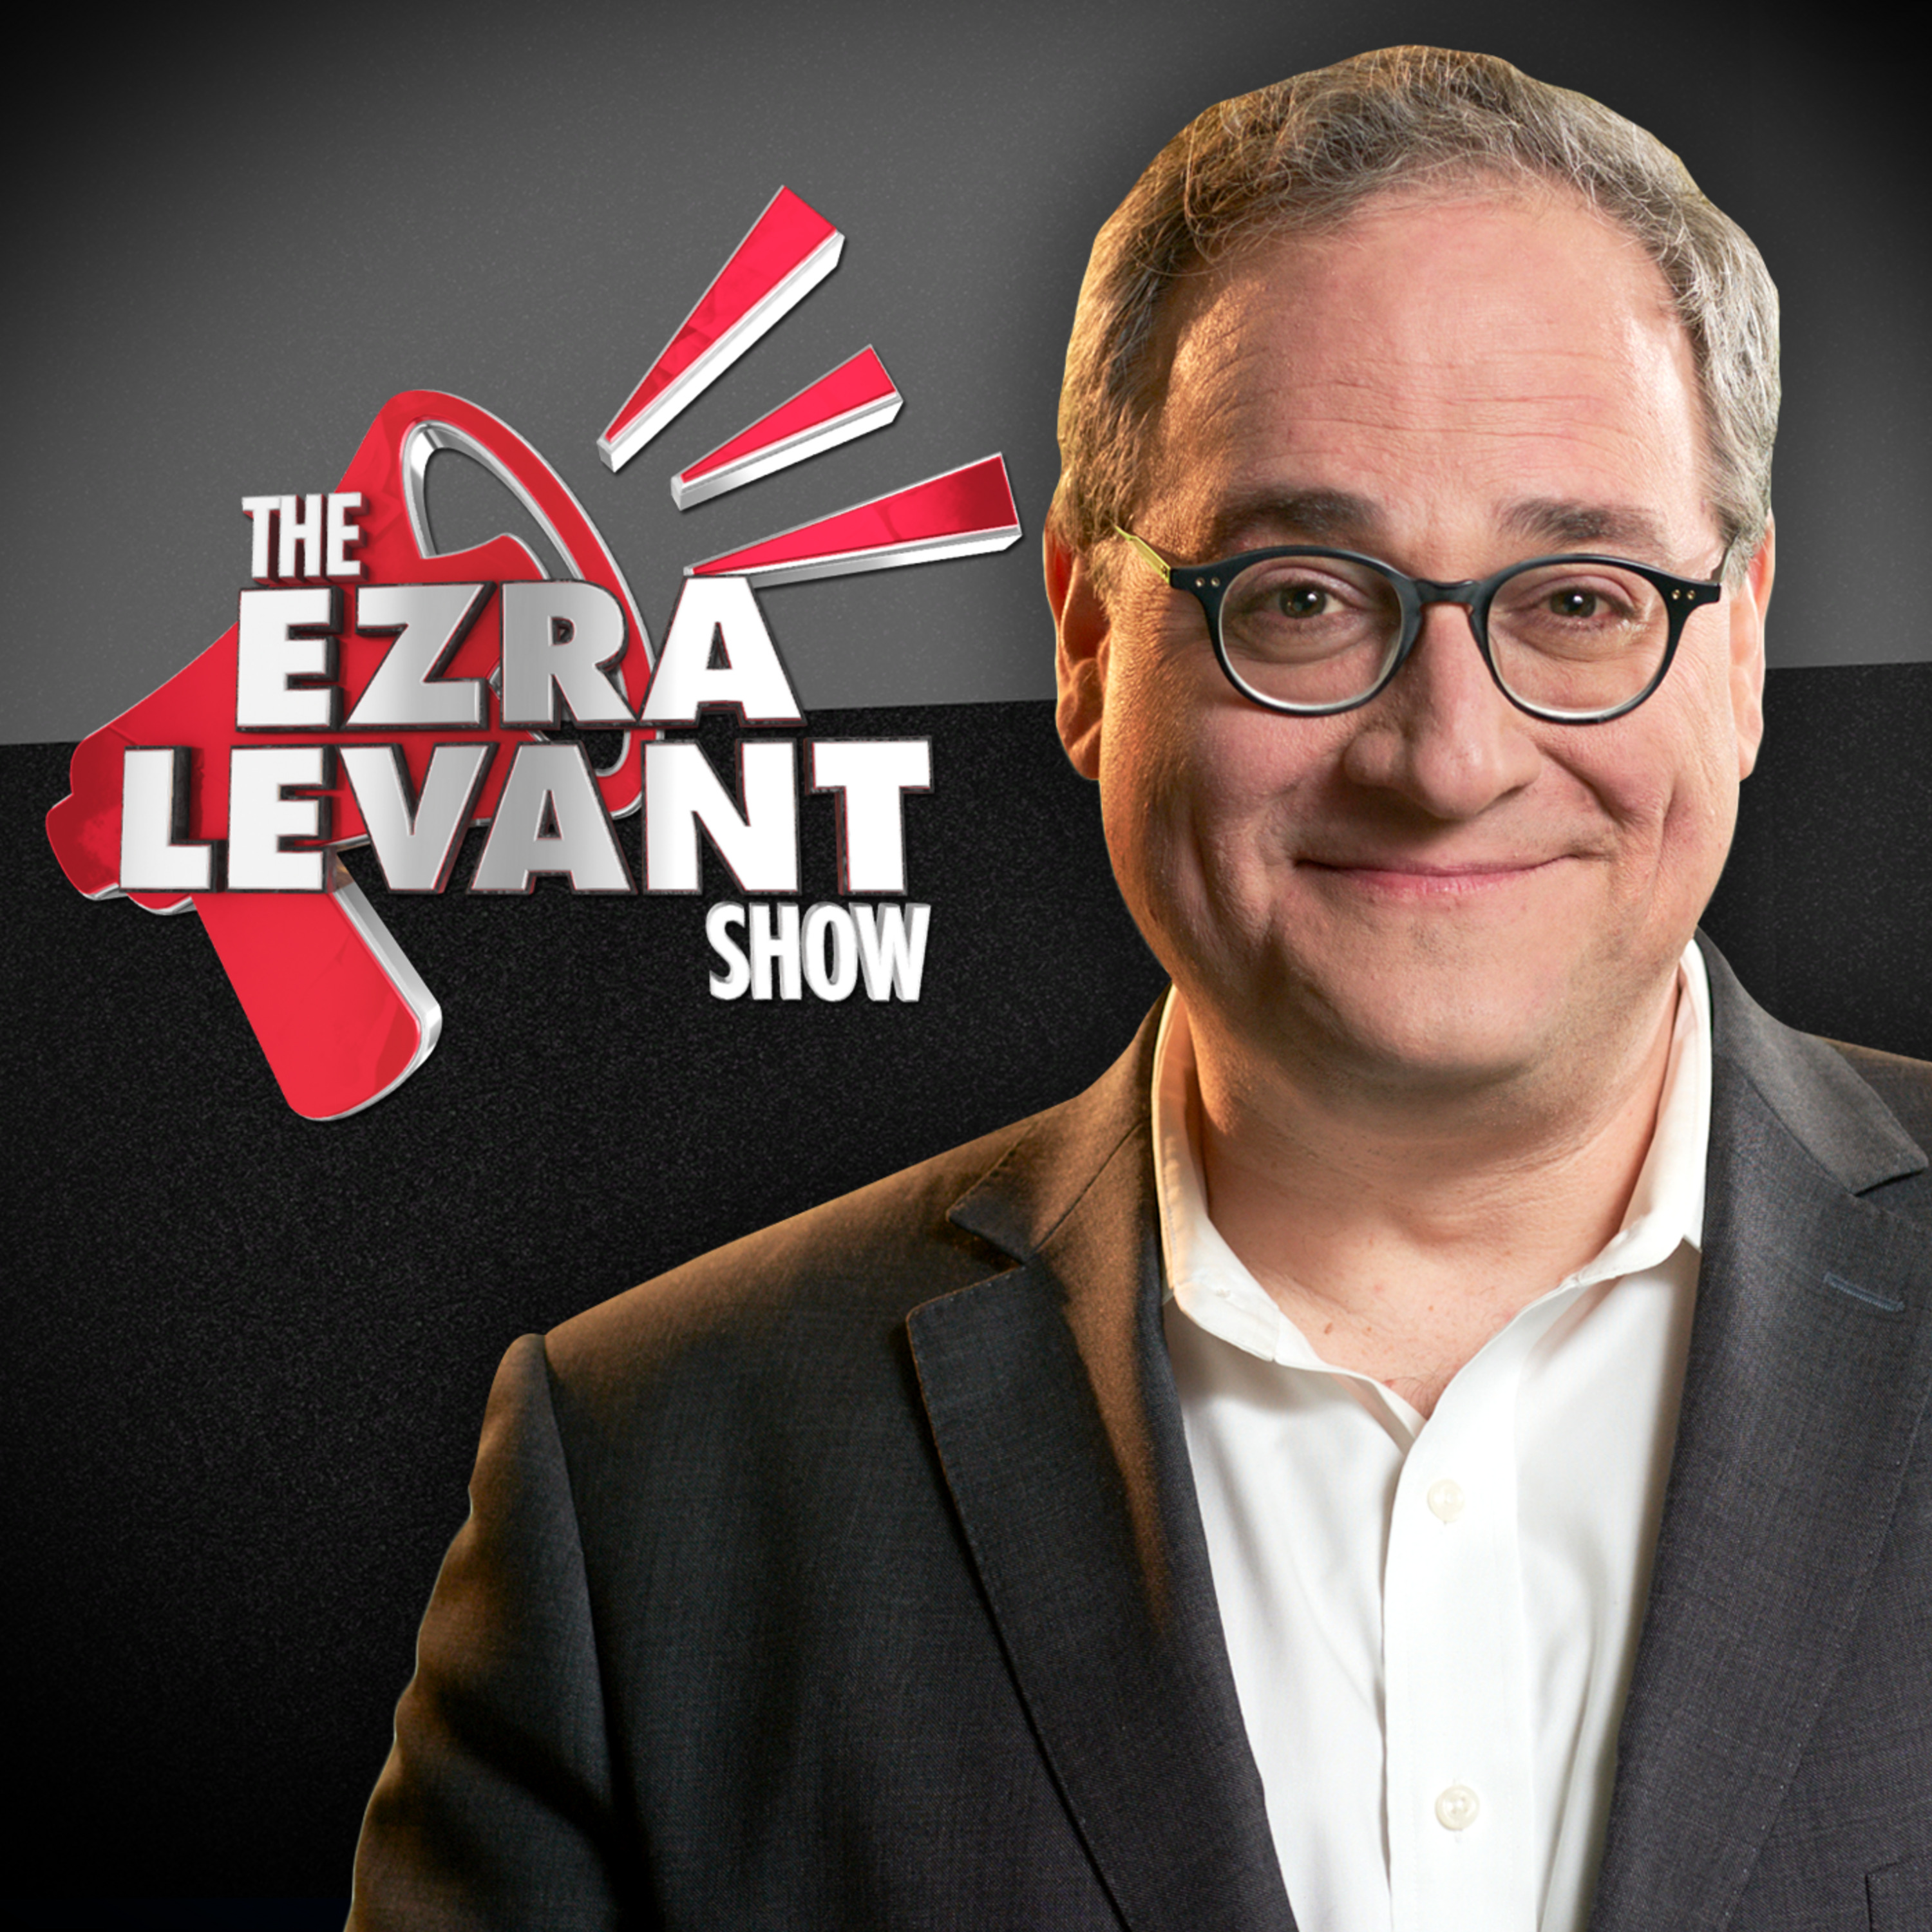 EZRA LEVANT | Canada's leading pollster asks Canadians what they think about Rebel News — and the answers are very encouraging!